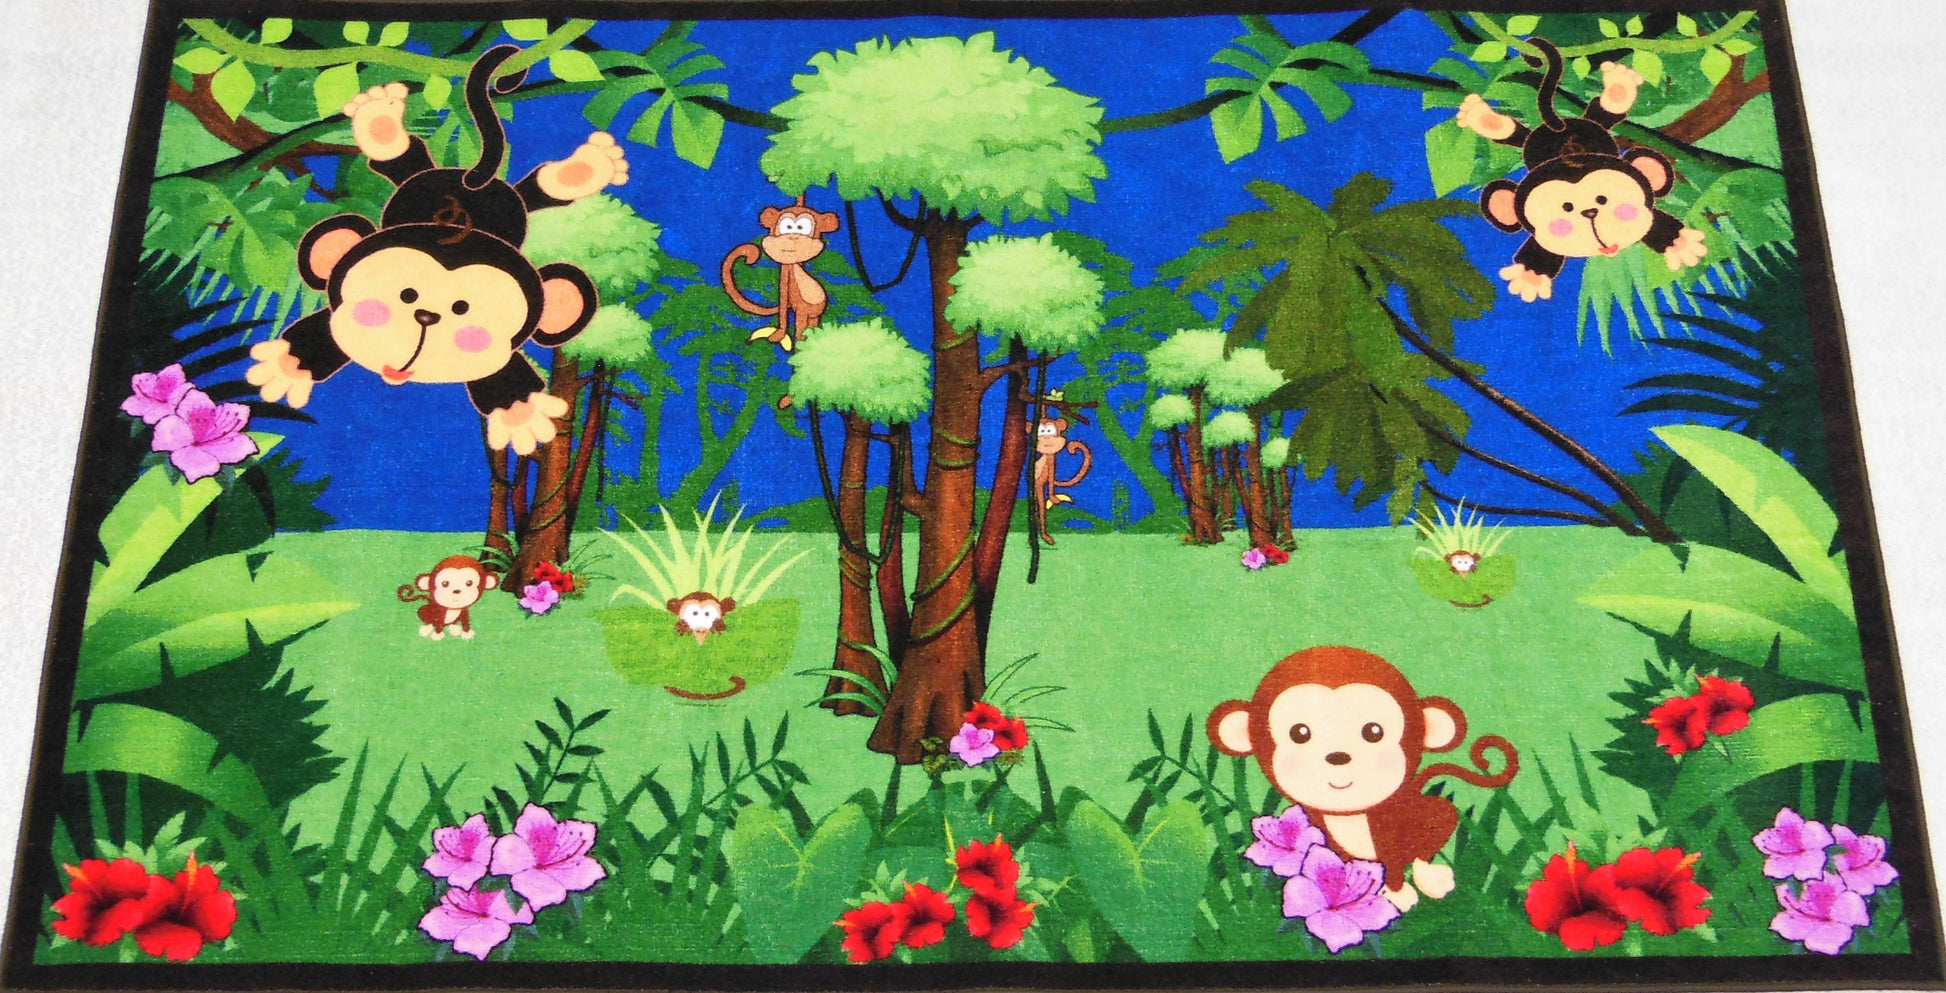 Monkeying Around Daycare/Preschool Area Rug side view